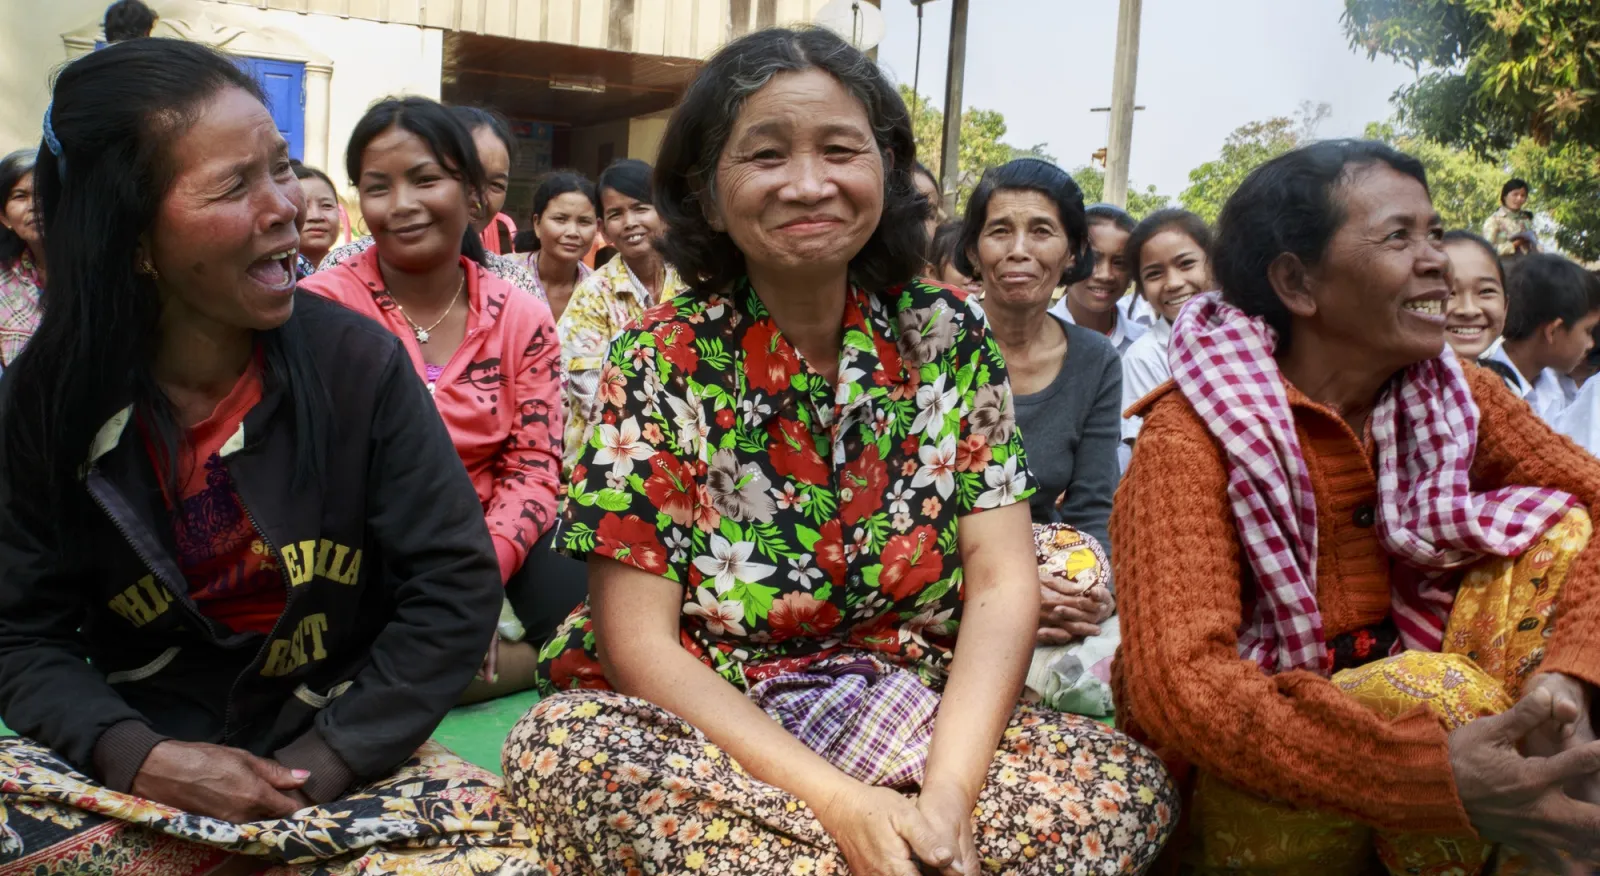 Three women sit on the ground in Cambodia, legs crossed and smiling in mid-conversation.